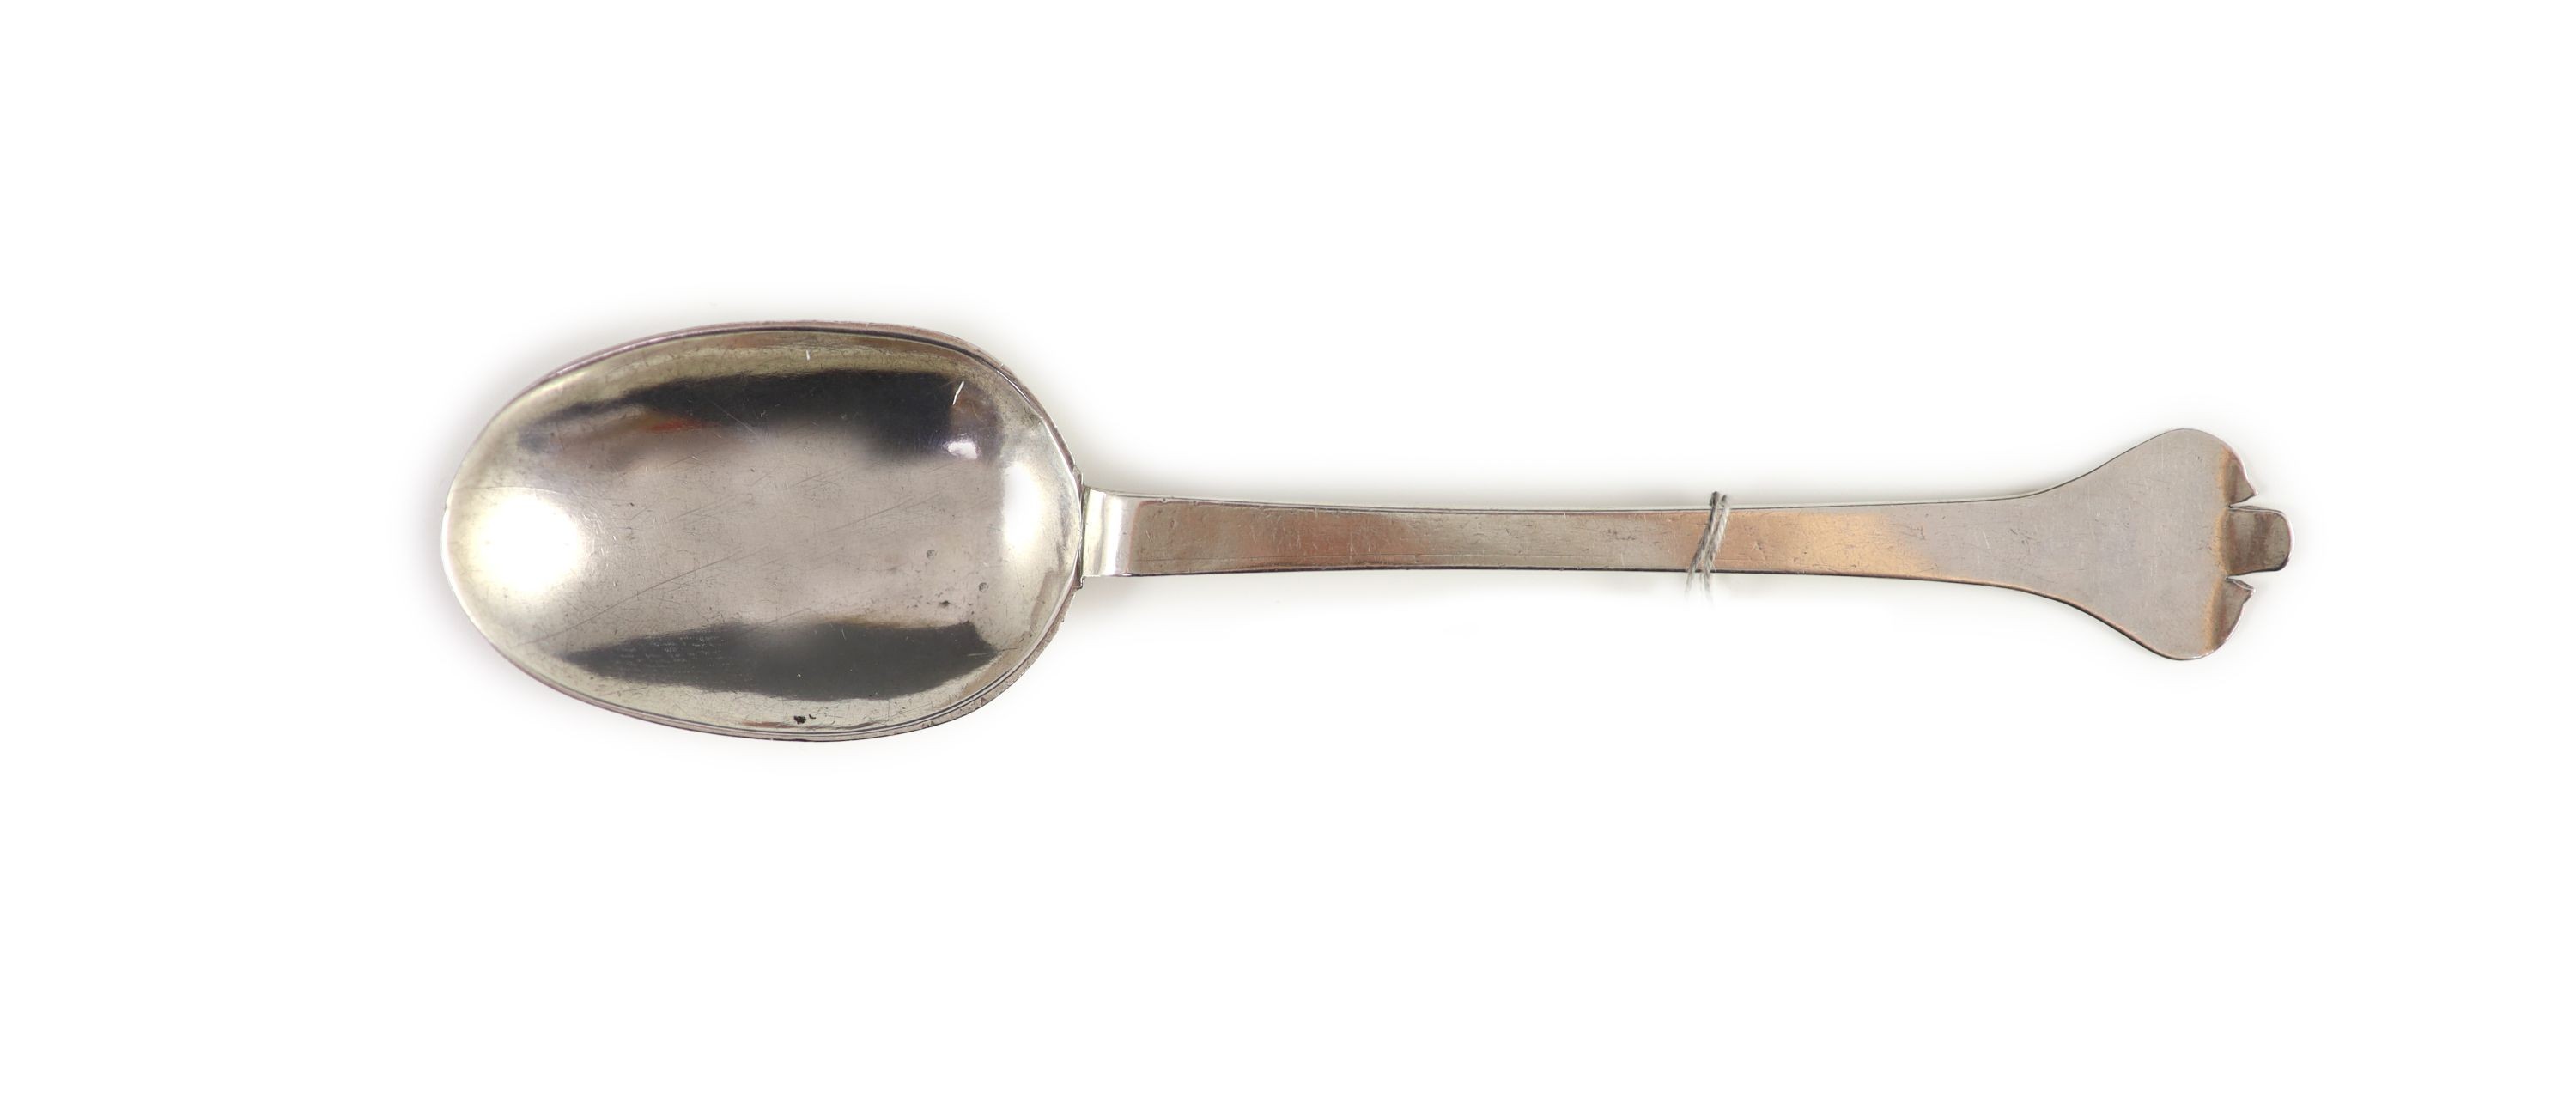 A provincial English silver trefid spoon, marks untraced, initialled to terminal underside ‘IRS’, c1670-90 , 19.5cm long, 1.4 oz.